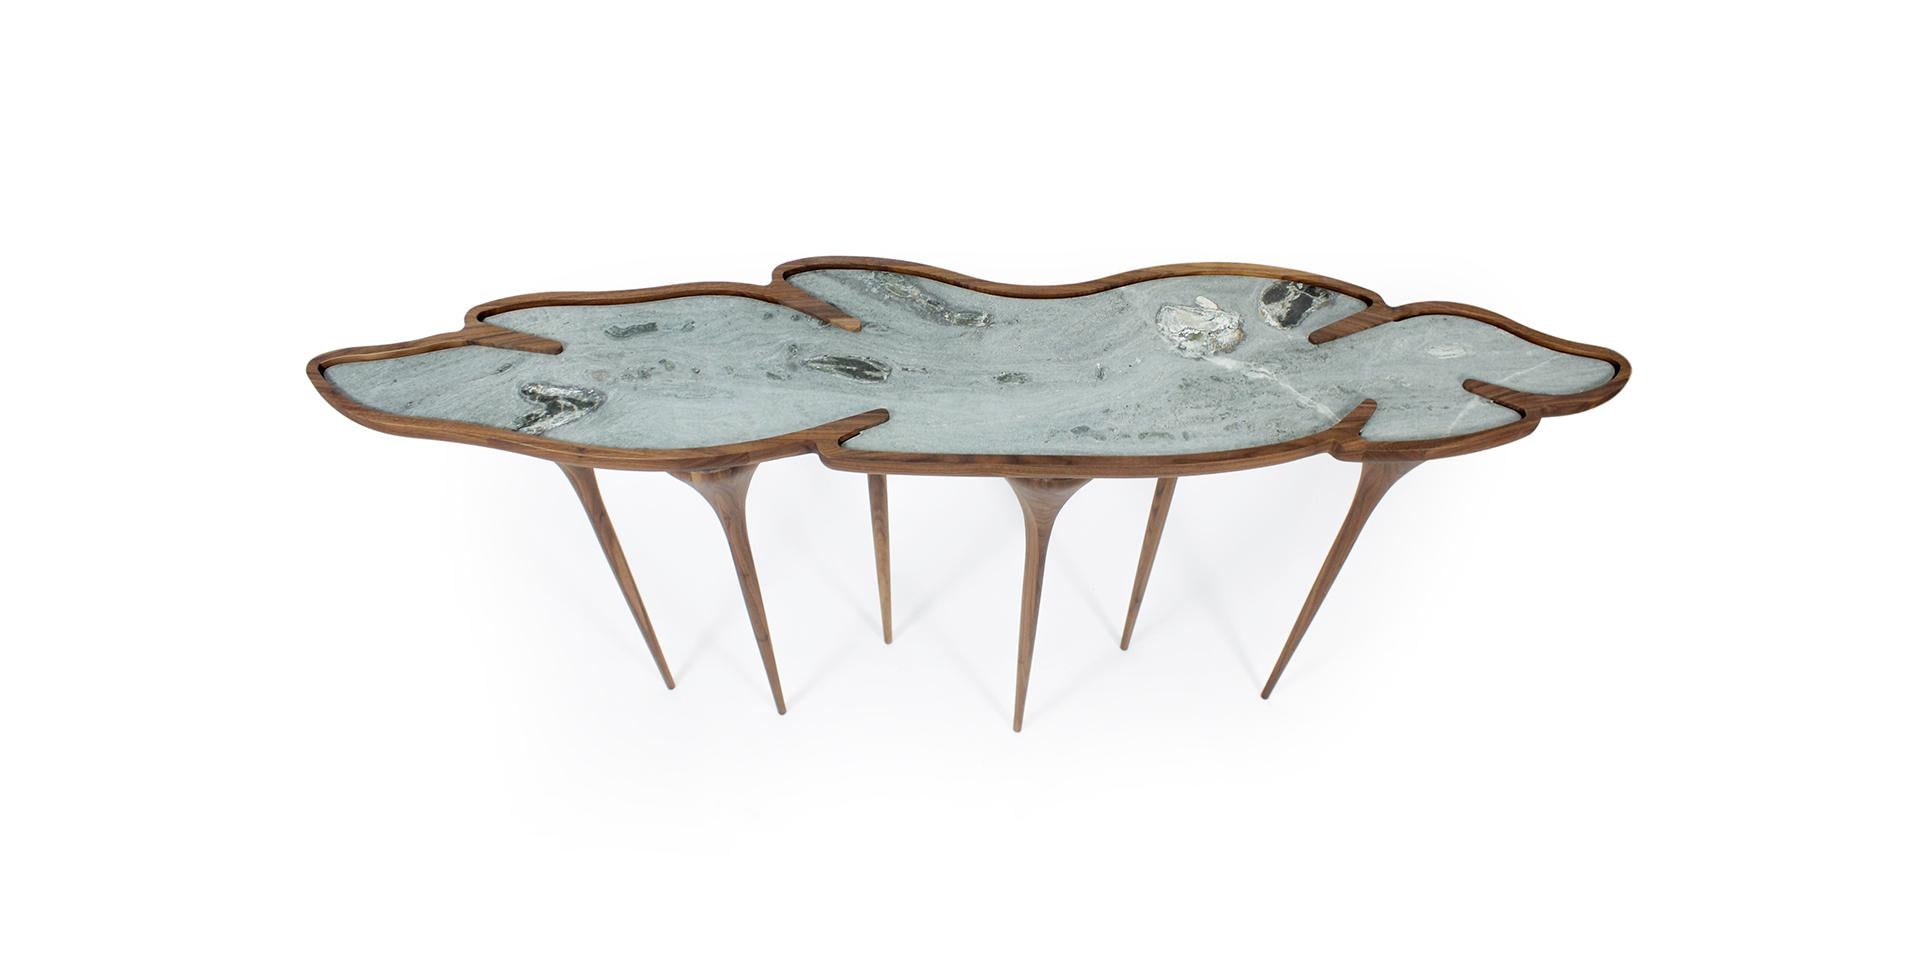 Korowai console is an elegant piece, made of walnut wood with green marble on the top. The console dazzles in interior designs with organic style decor.
This is one of the most impressive World Heritage reported by Alma de Luce, to inspire all of us.